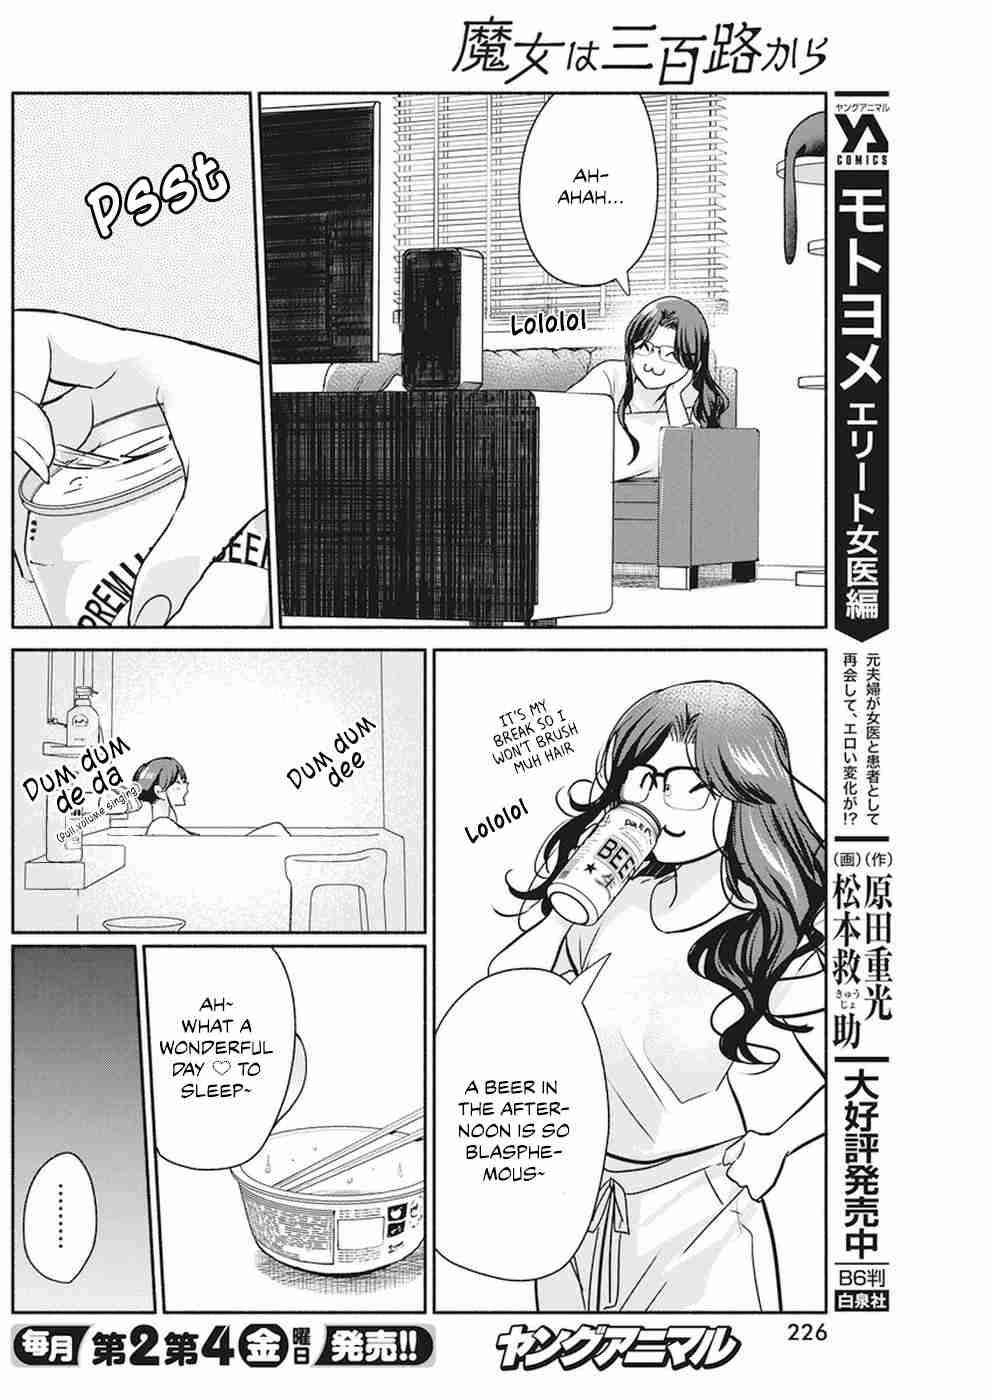 The Life of the Witch Who Remains Single for About 300 Years! Vol. 2 Ch. 12 12th Night